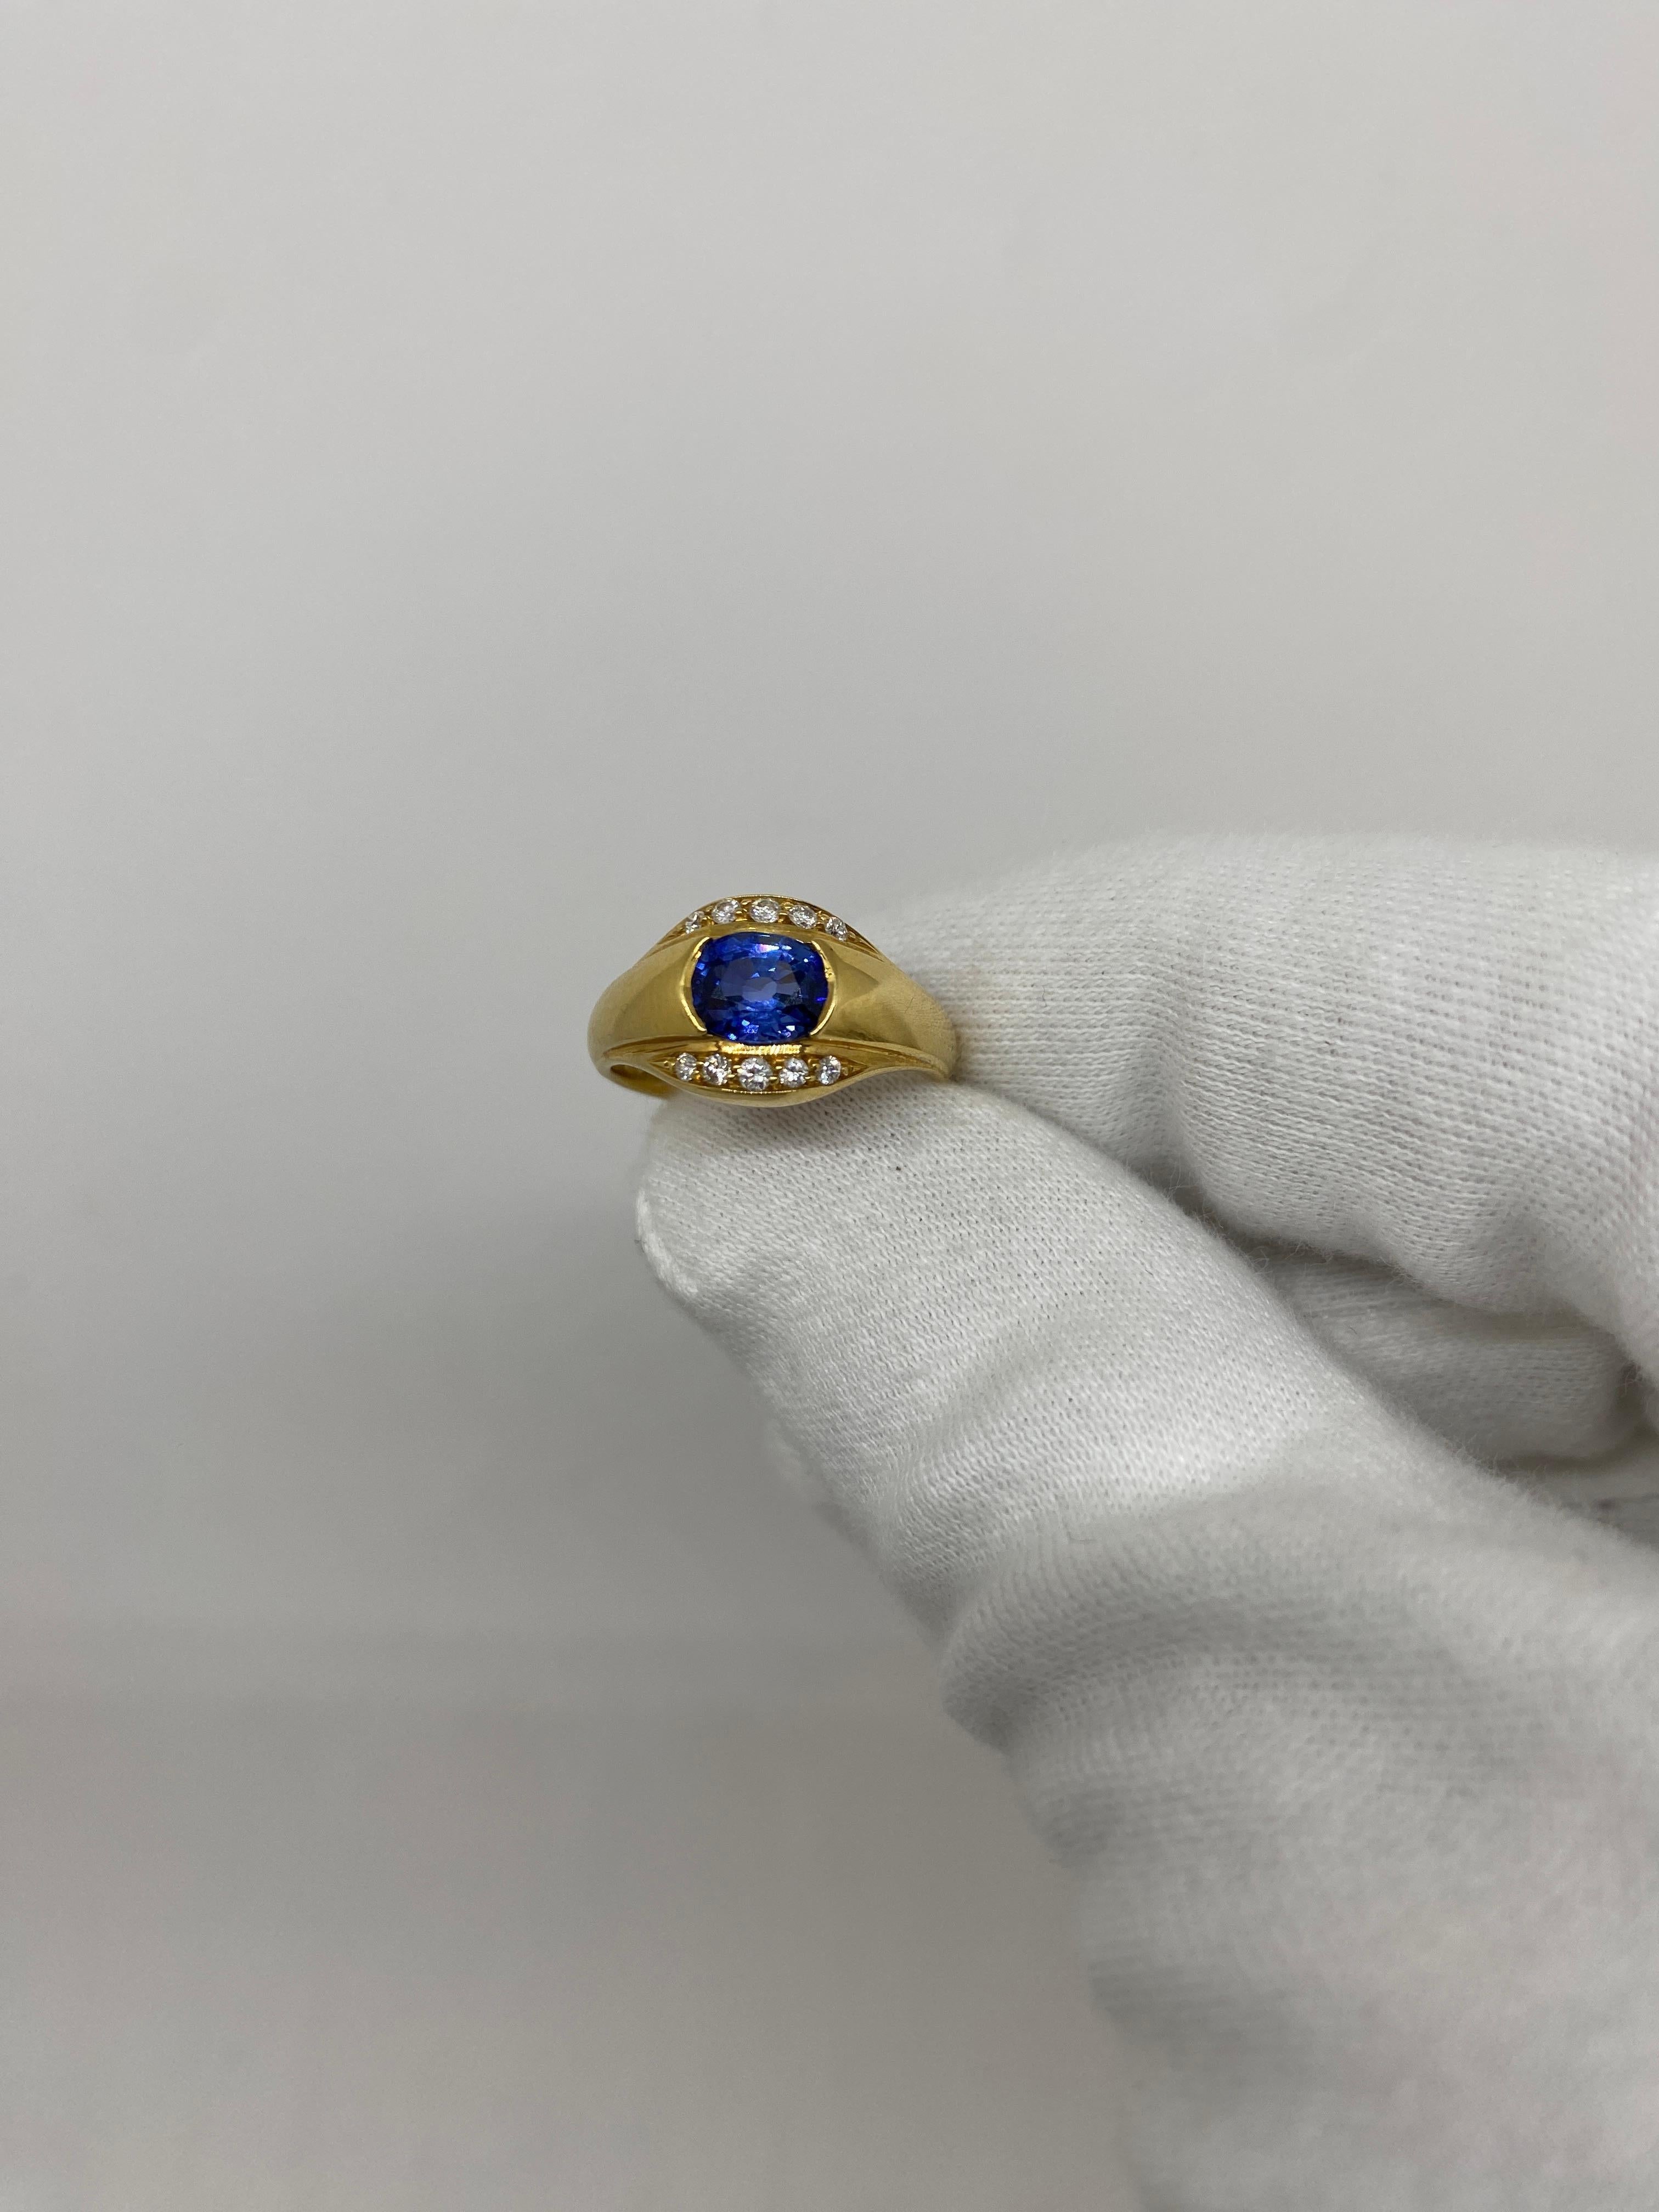 Ring made of 18kt yellow gold with central blue sapphire for ct.1.36 and natural white brilliant-cut diamonds for ct.0.20

Welcome to our jewelry collection, where every piece tells a story of timeless elegance and unparalleled craftsmanship. As a